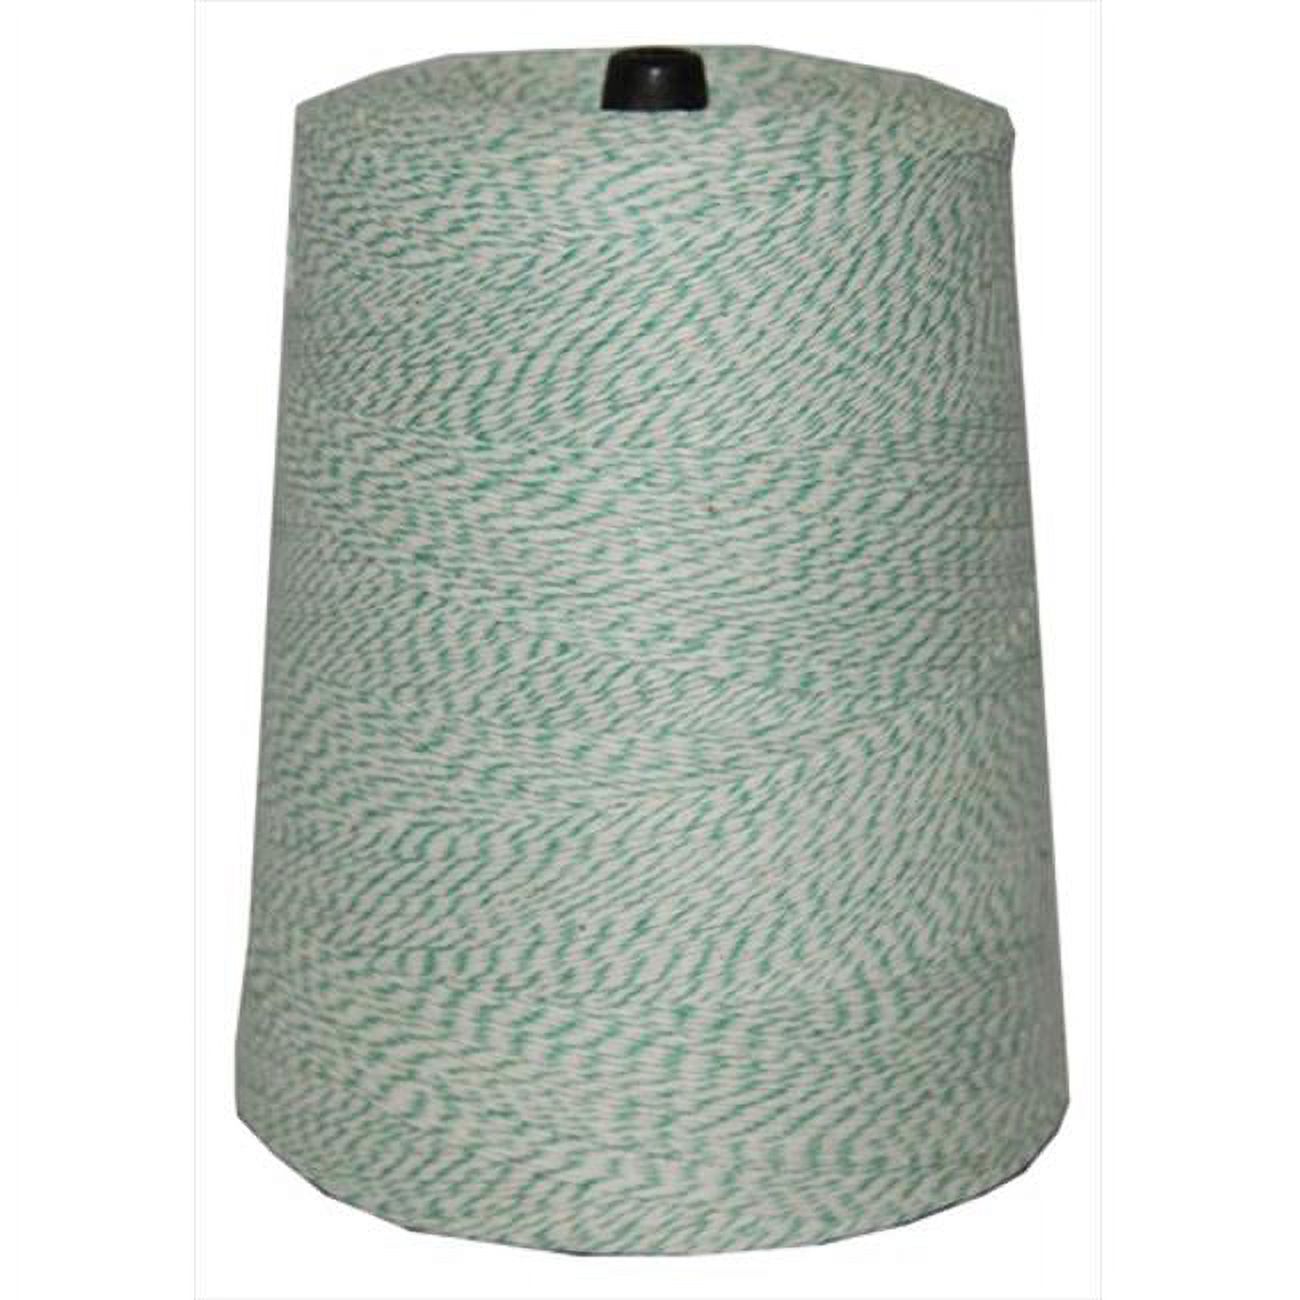 T.W. Evans Cordage  4 Poly Variegated 2 Pound Cone with 9600 ft. in Green and White - image 1 of 1